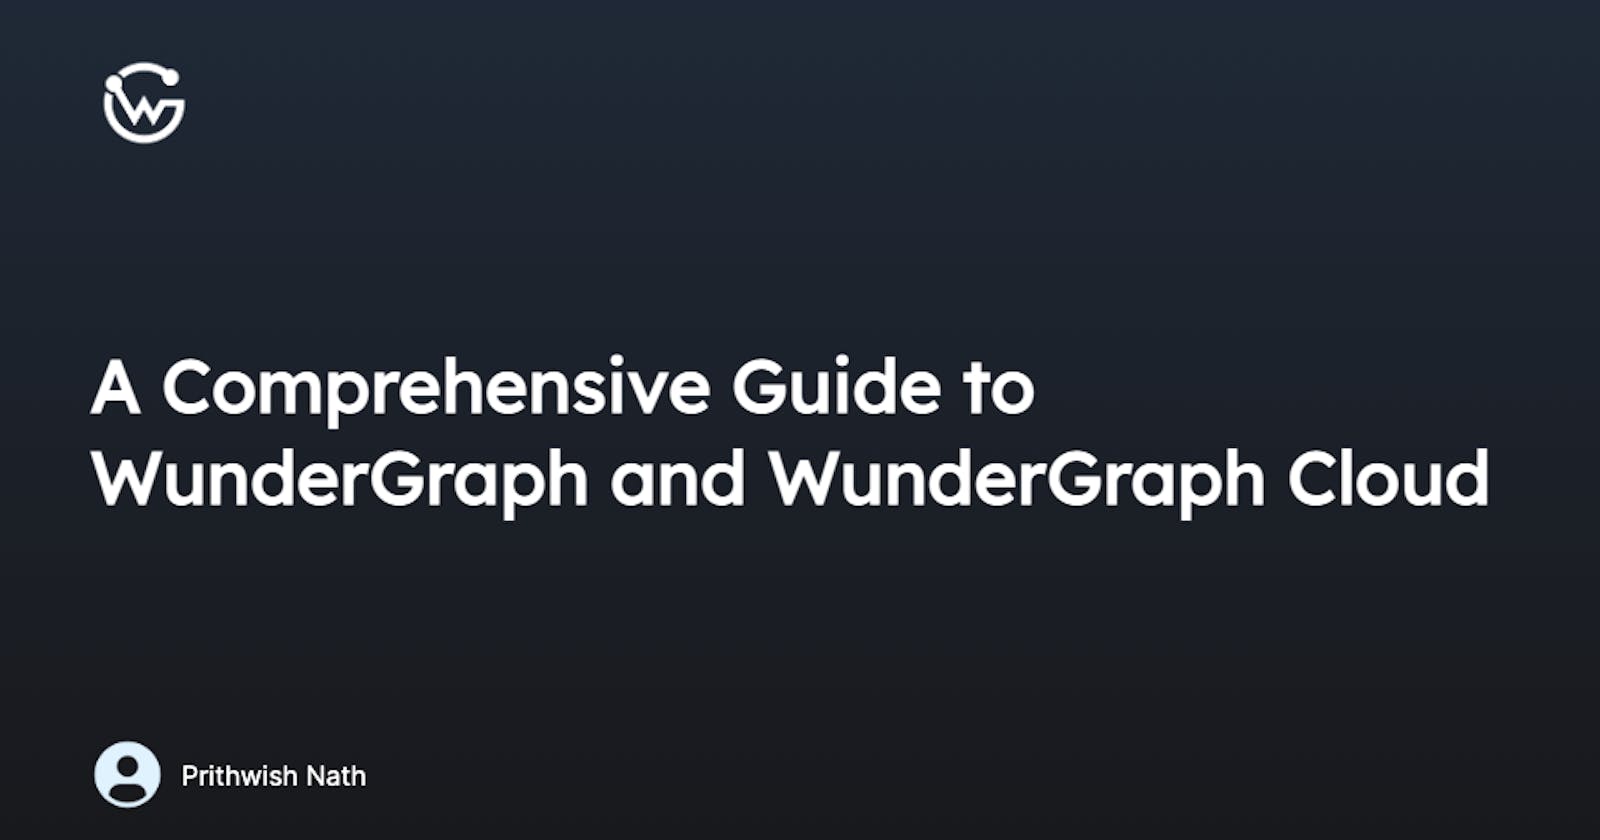 A comprehensive Guide to WunderGraph and WunderGraph Cloud